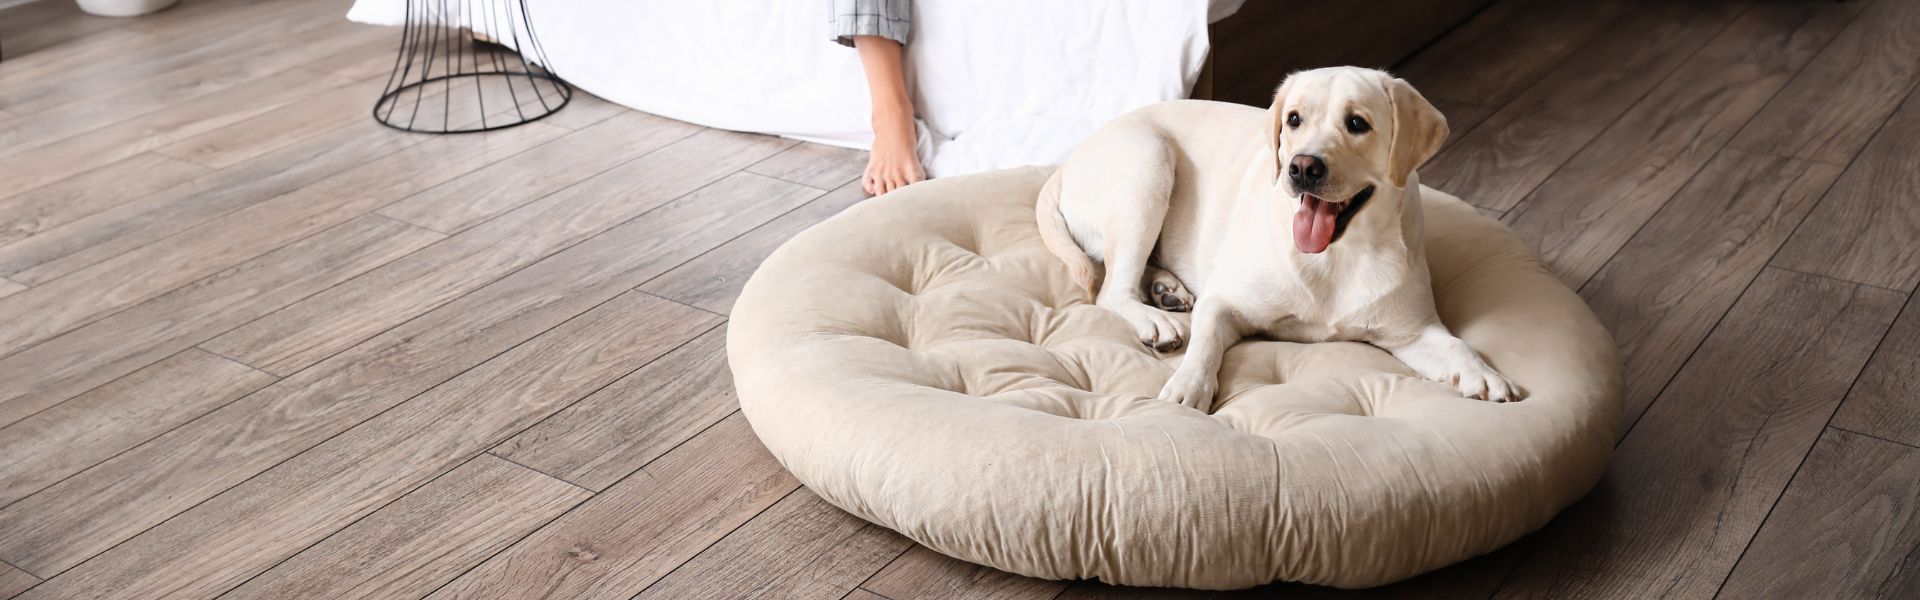 How to wash dog beds & keep them clean all week